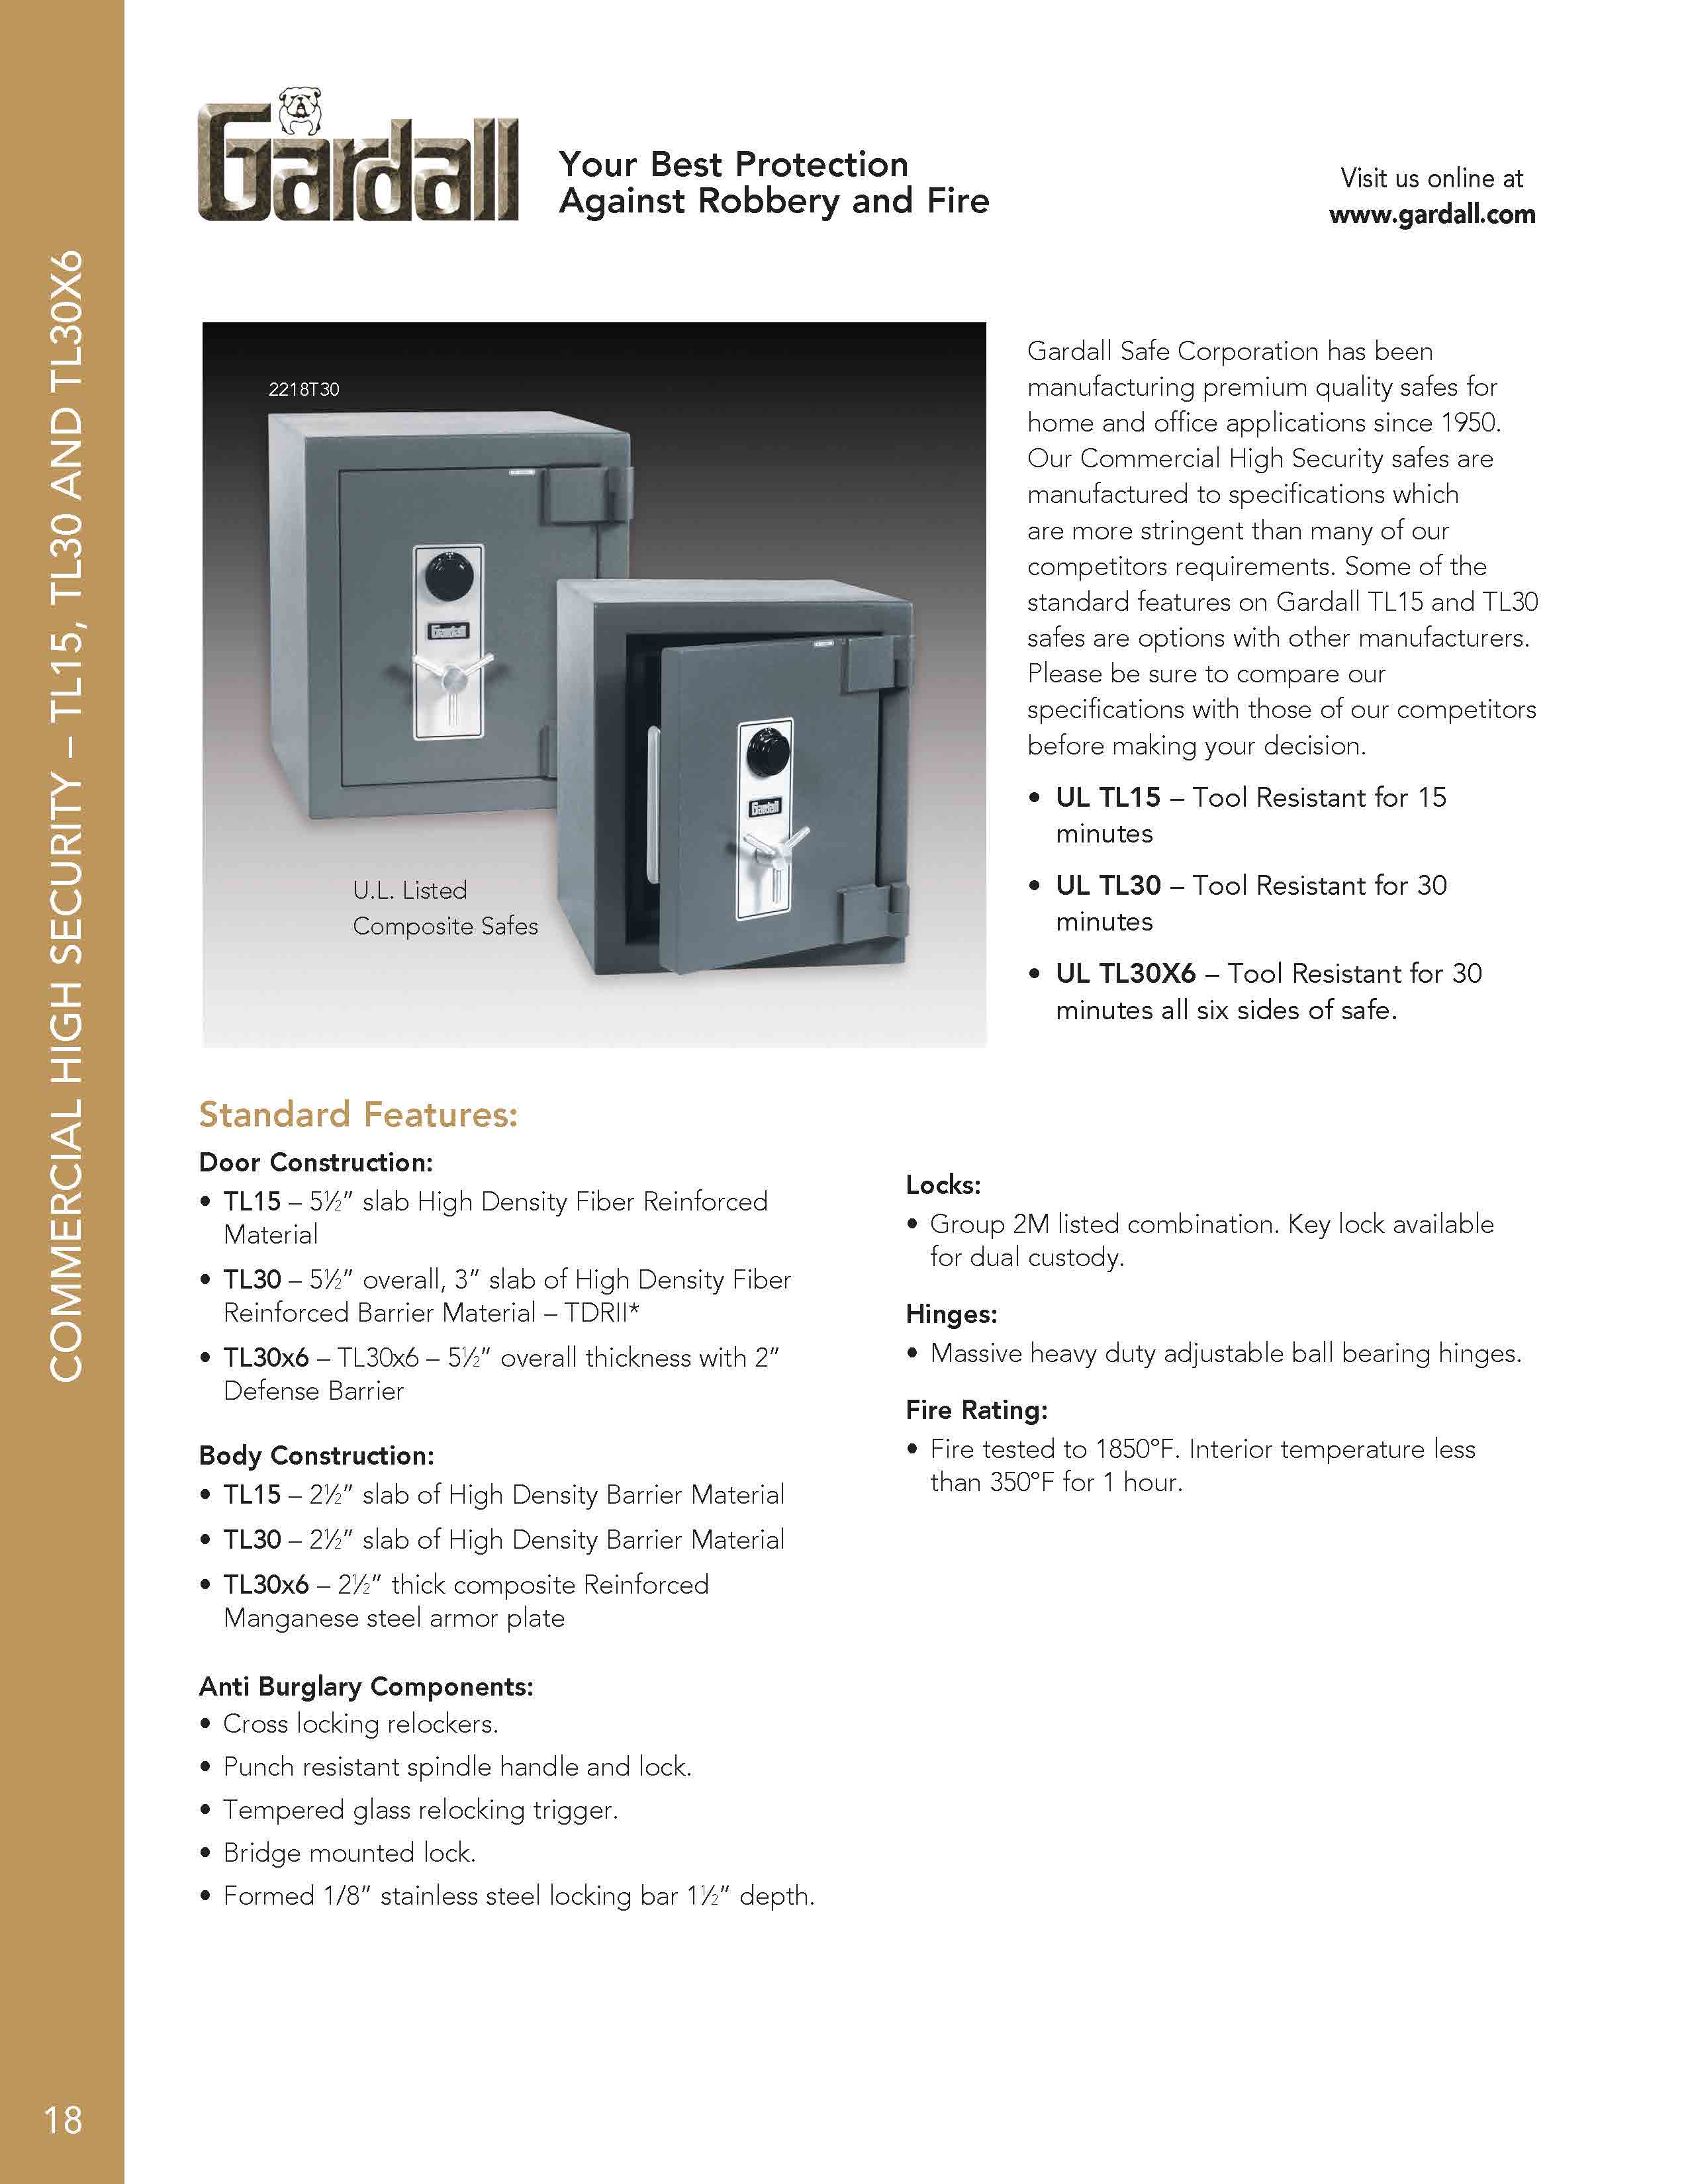 Commercial high security safe catalog